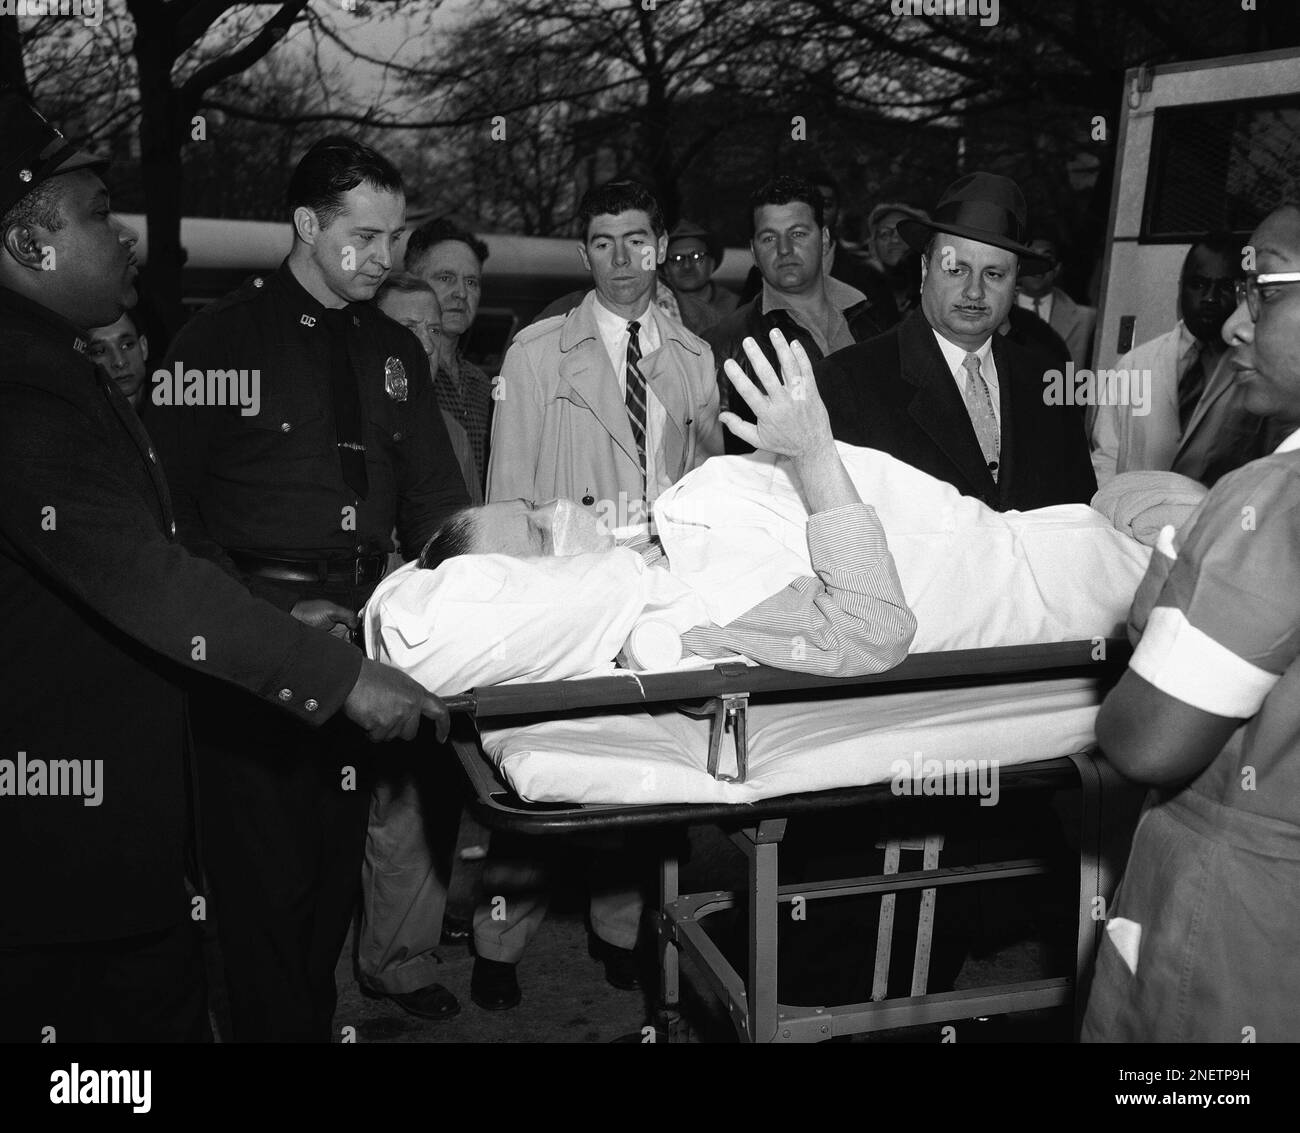 George Metesky, the mad bomber who planted 32 home made explosives in New  York public places over the past 16 years, waves feebly from his stretcher  as he is carried from Kings